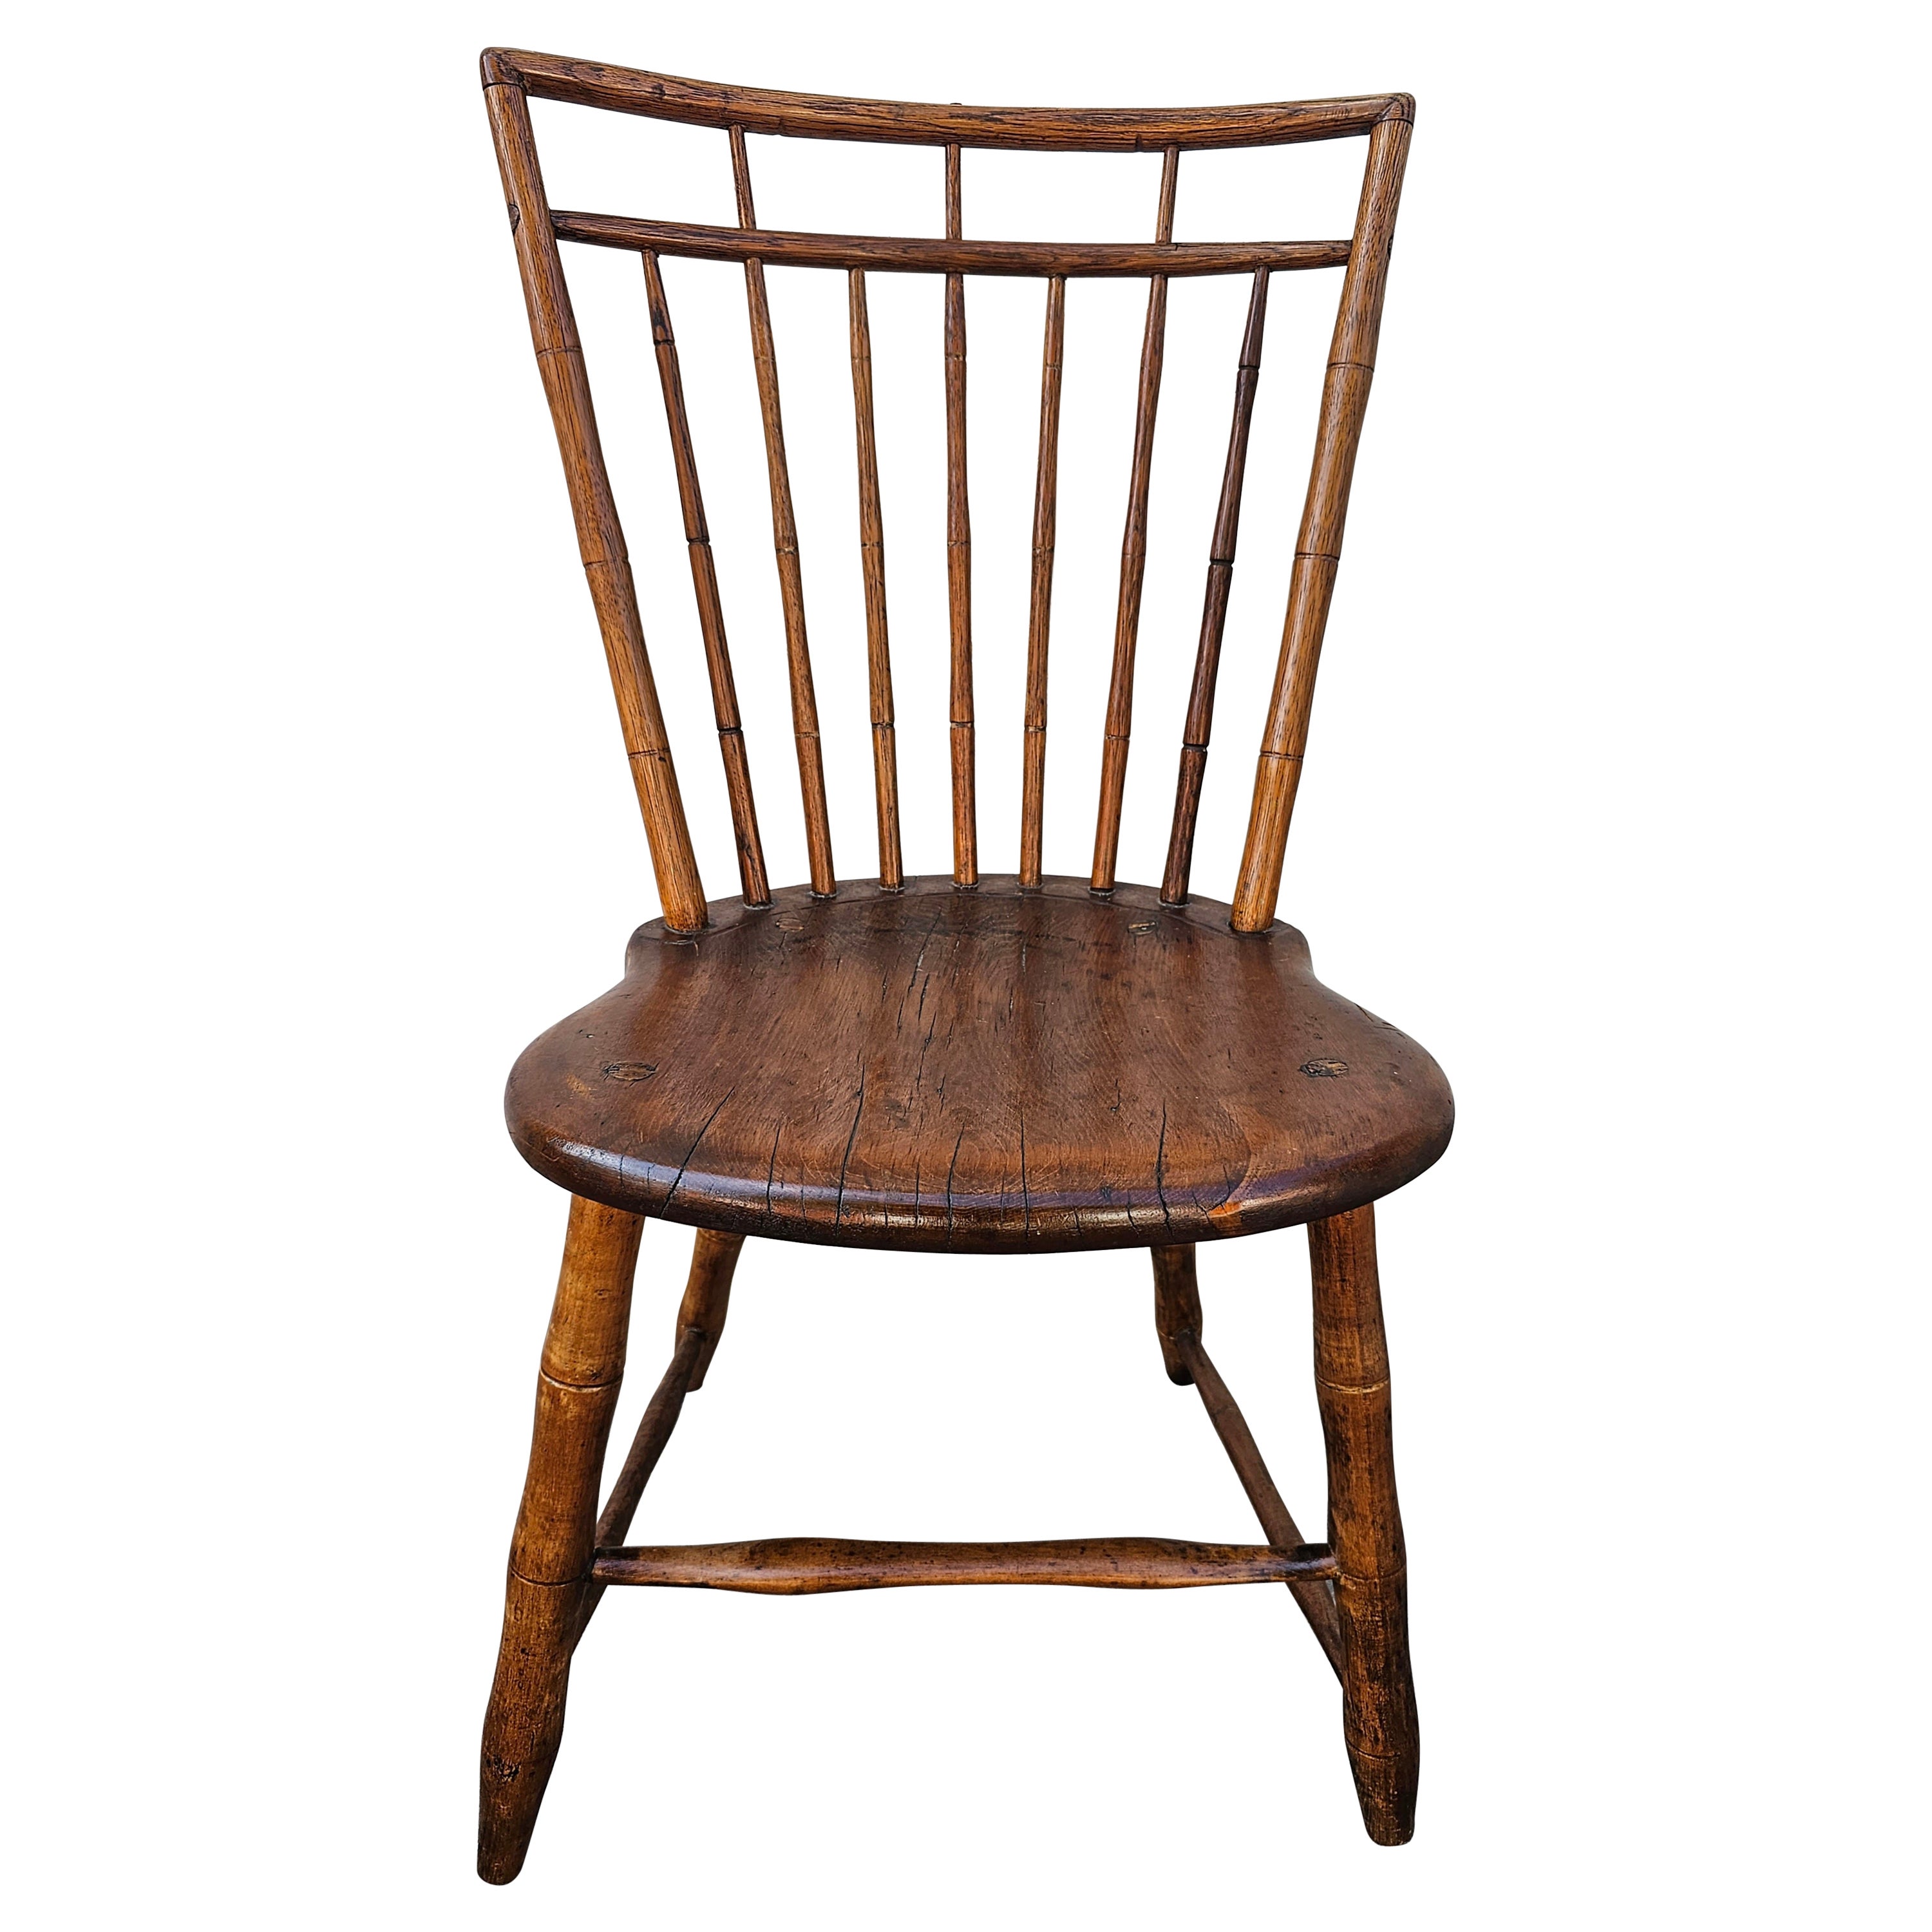 19th Century Early American Elm Windsor Plank Chair